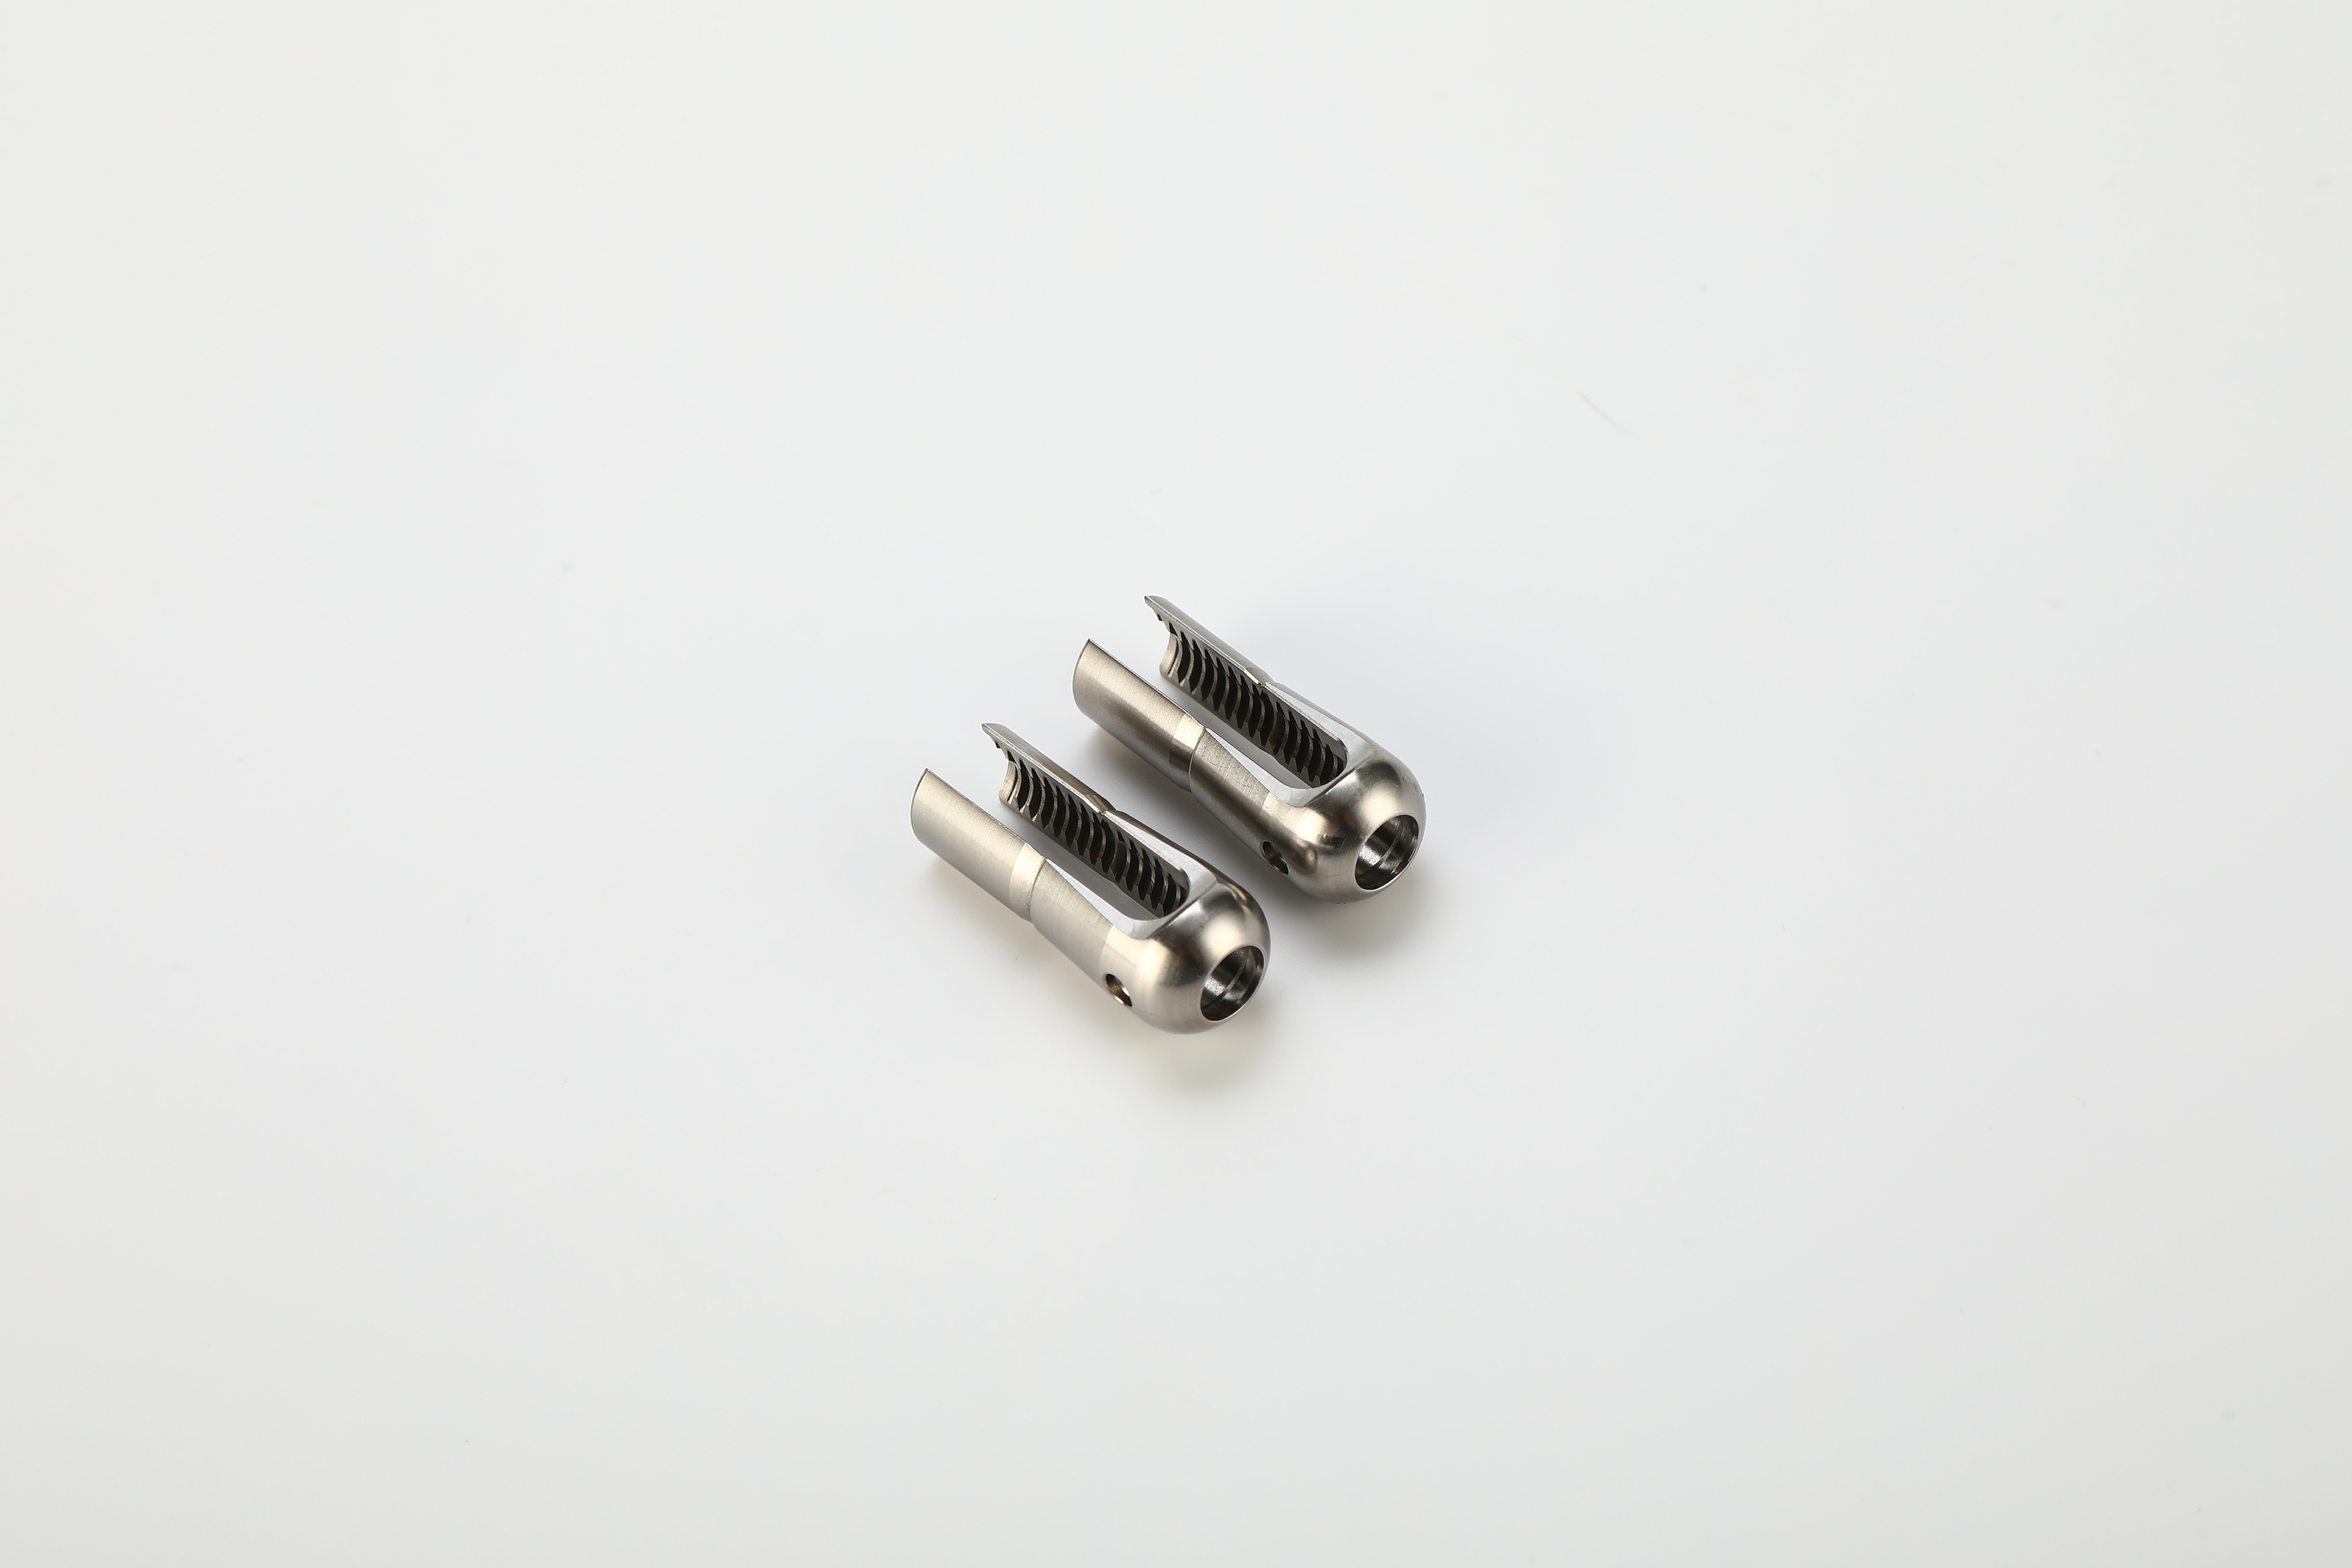 Spinal Screw Head for Spinal Fixation